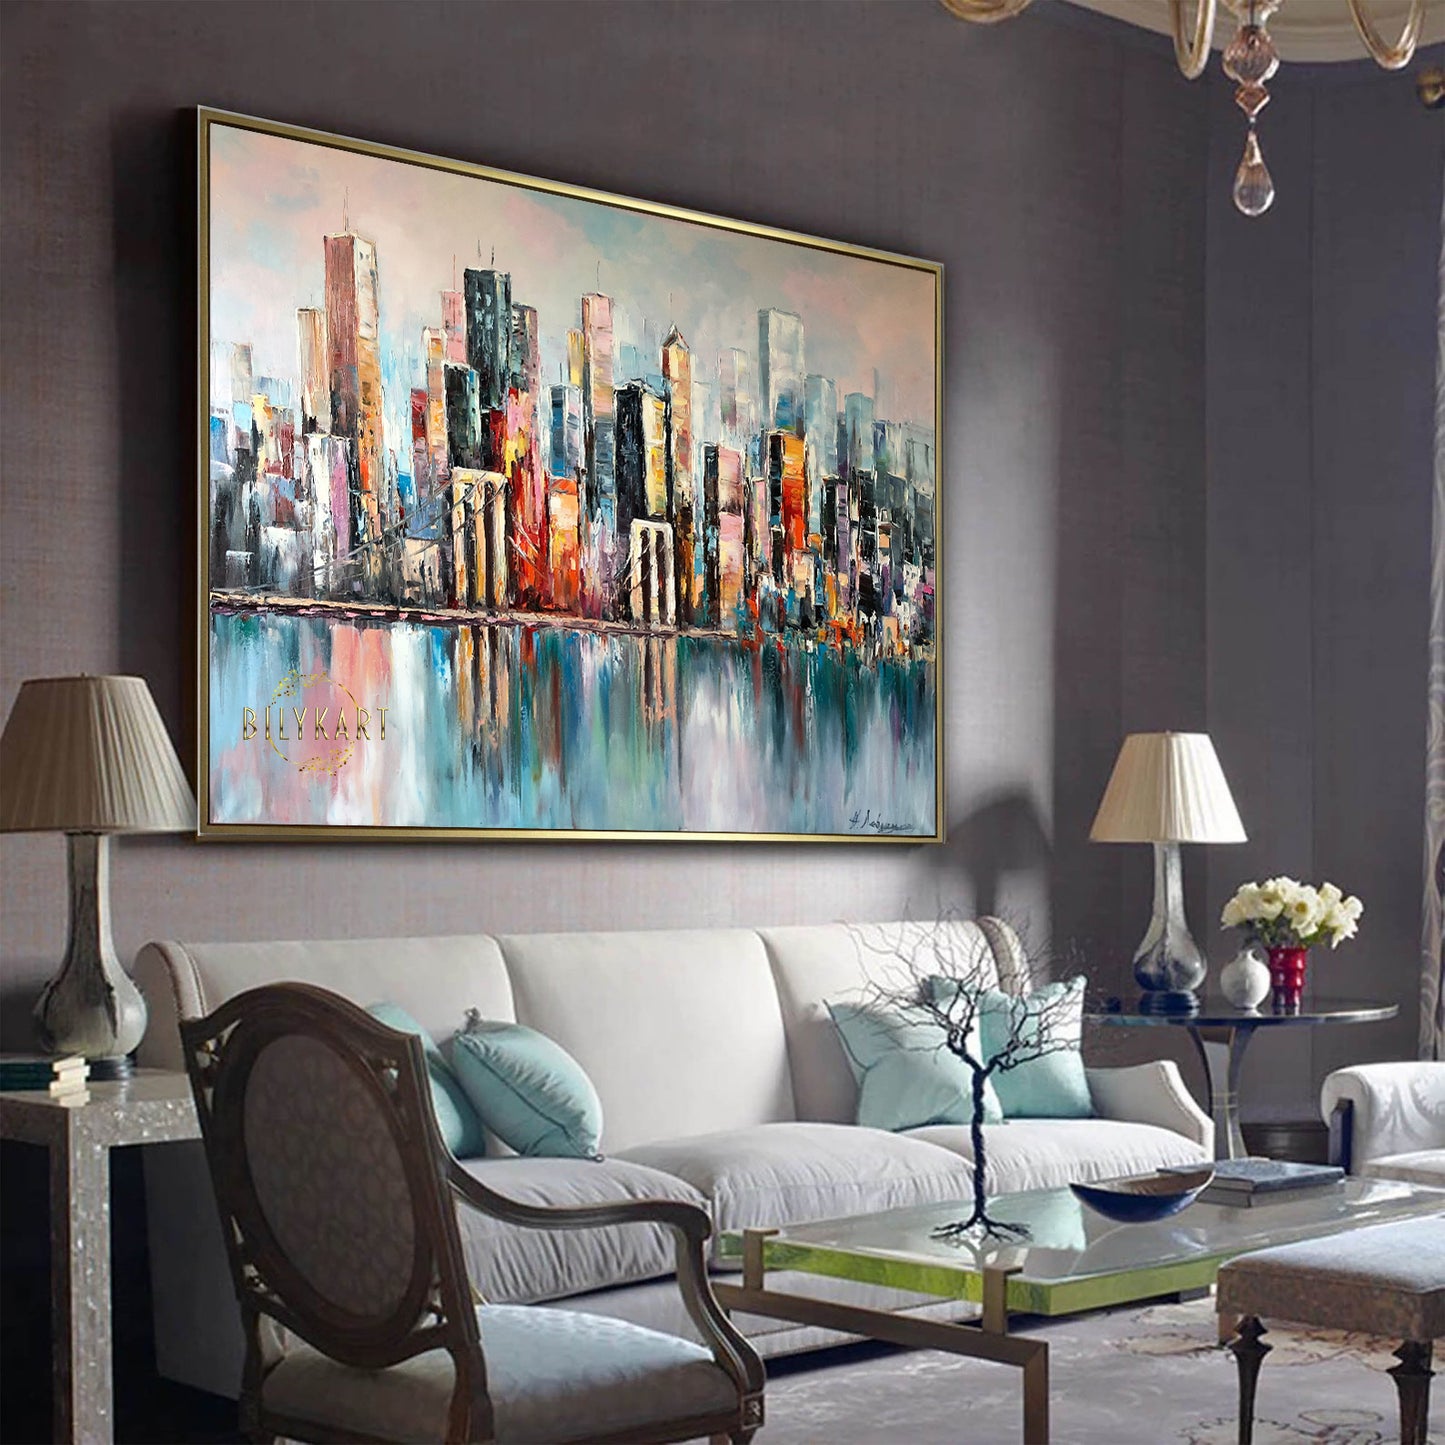 Large Abstract New York City Painting on Canvas, NY Brooklyn Bridge Oil Painting, NYC Skyline Wall Art, Sunset Abstract City Skyline Painting